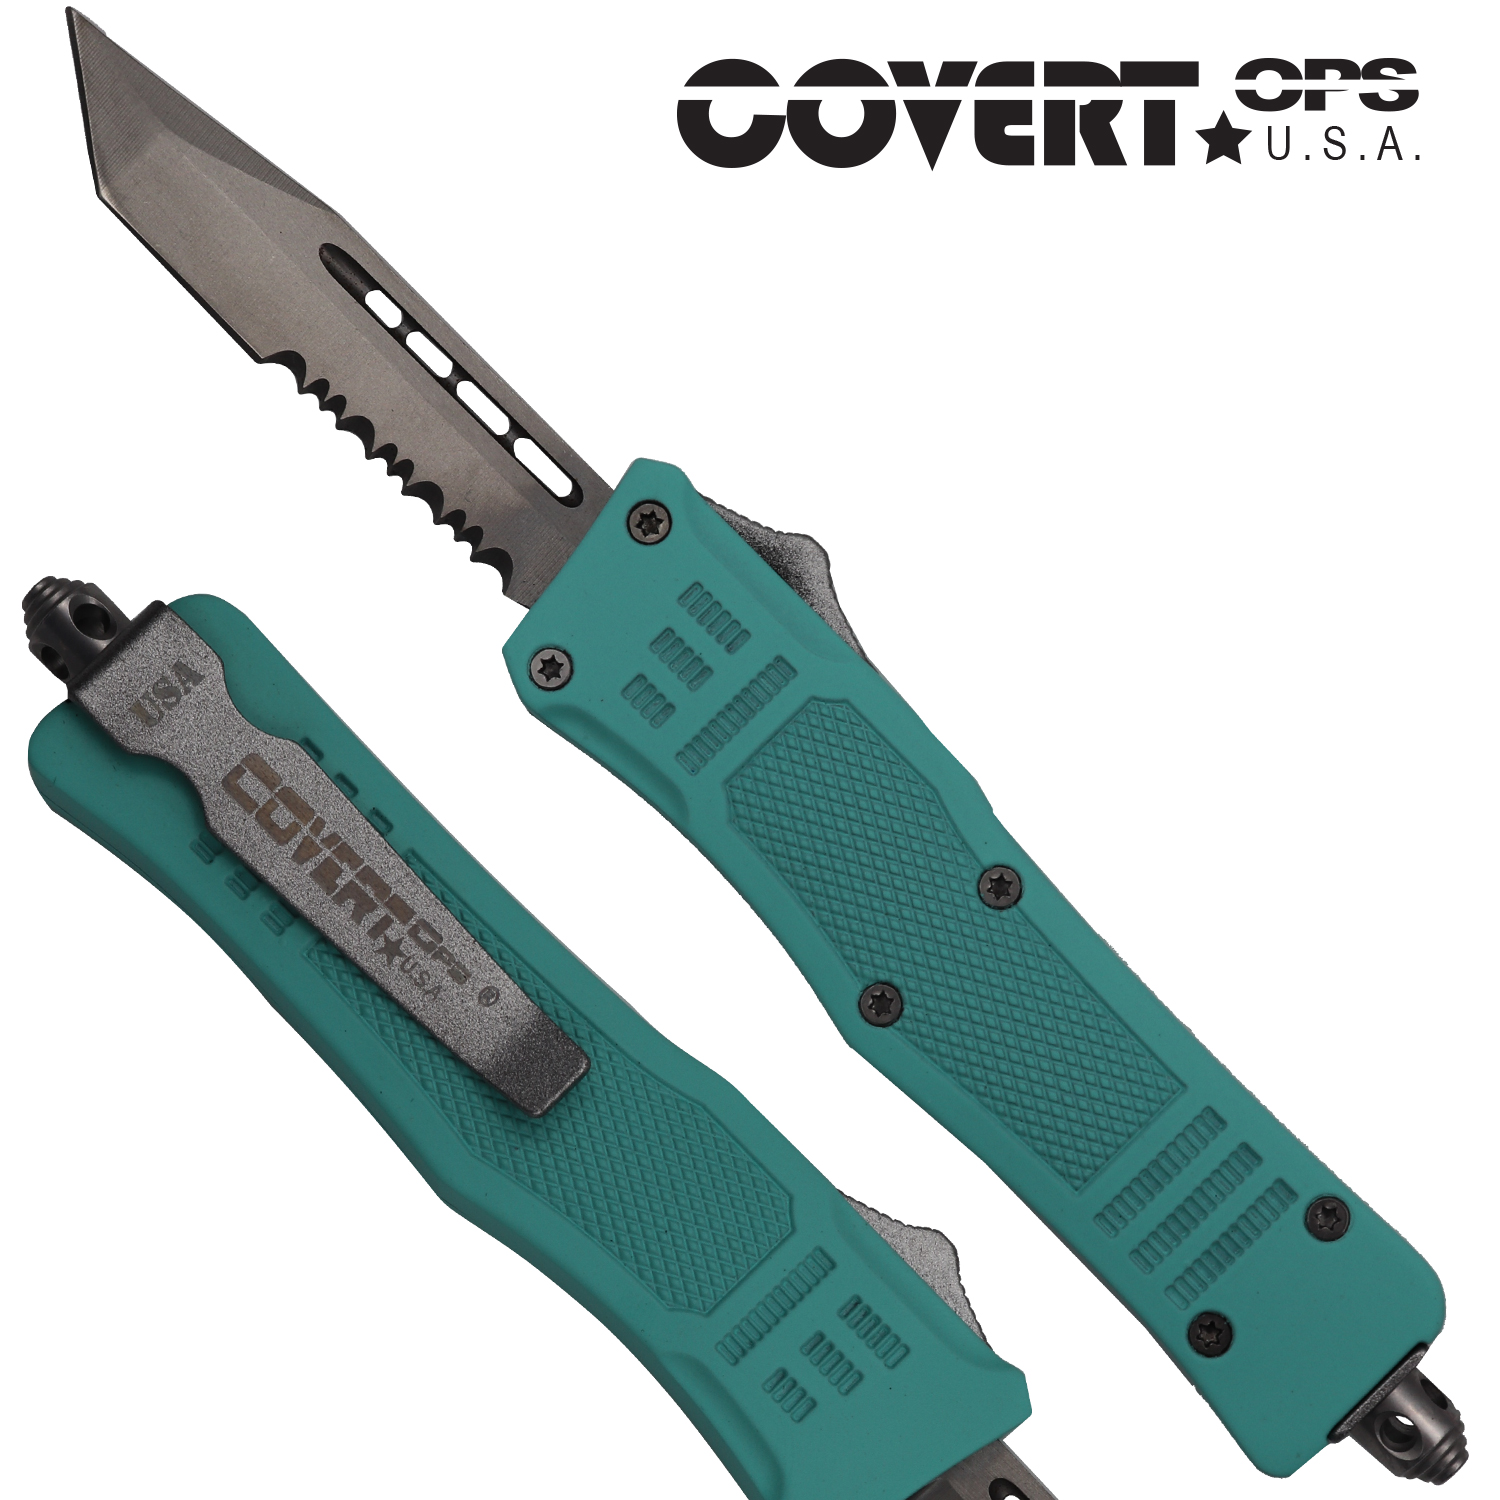 Covert OPS USA OTF Automatic Knife 7 inch overall Tiffany Blue Handle Silver Tanto D2 Steel Blade